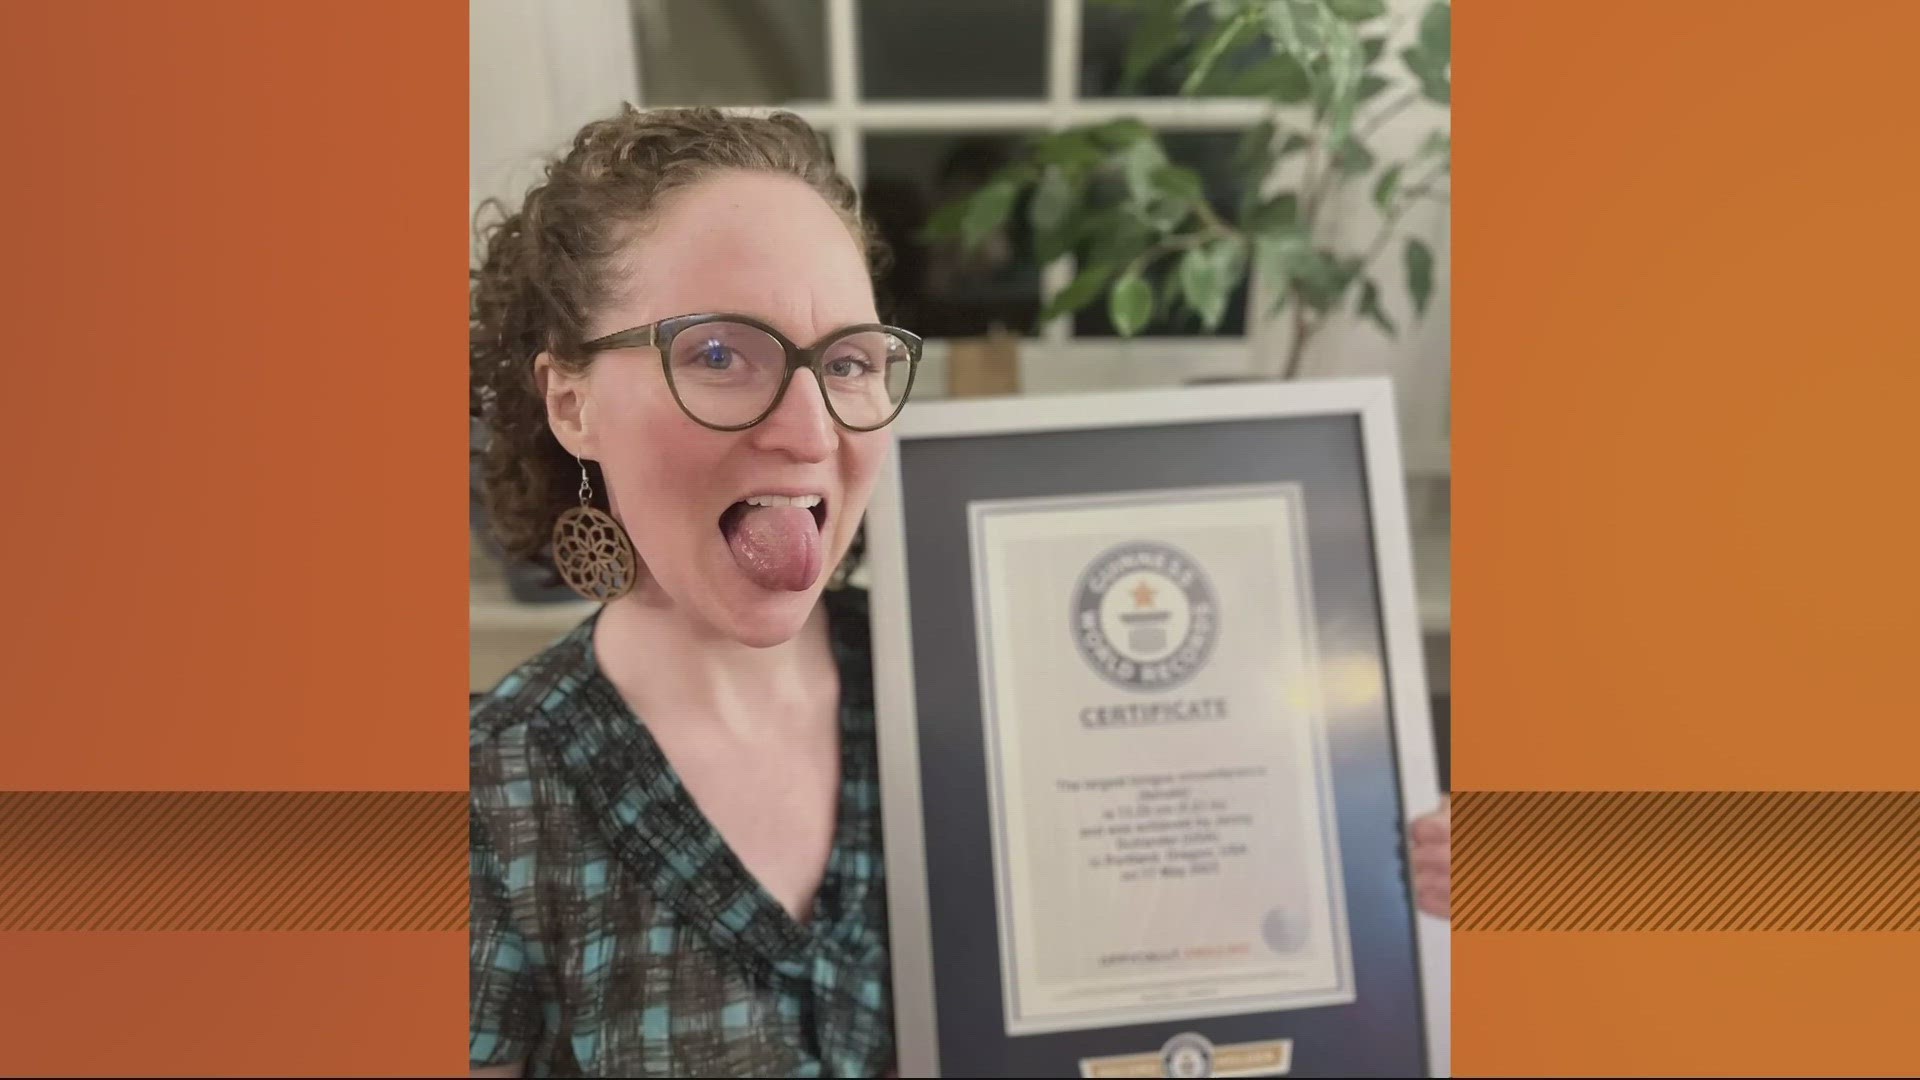 Jenny DuVander is the Guinness World Record holder for the world's largest tongue circumference for a woman. Her tongue circumference measure just over five inches.